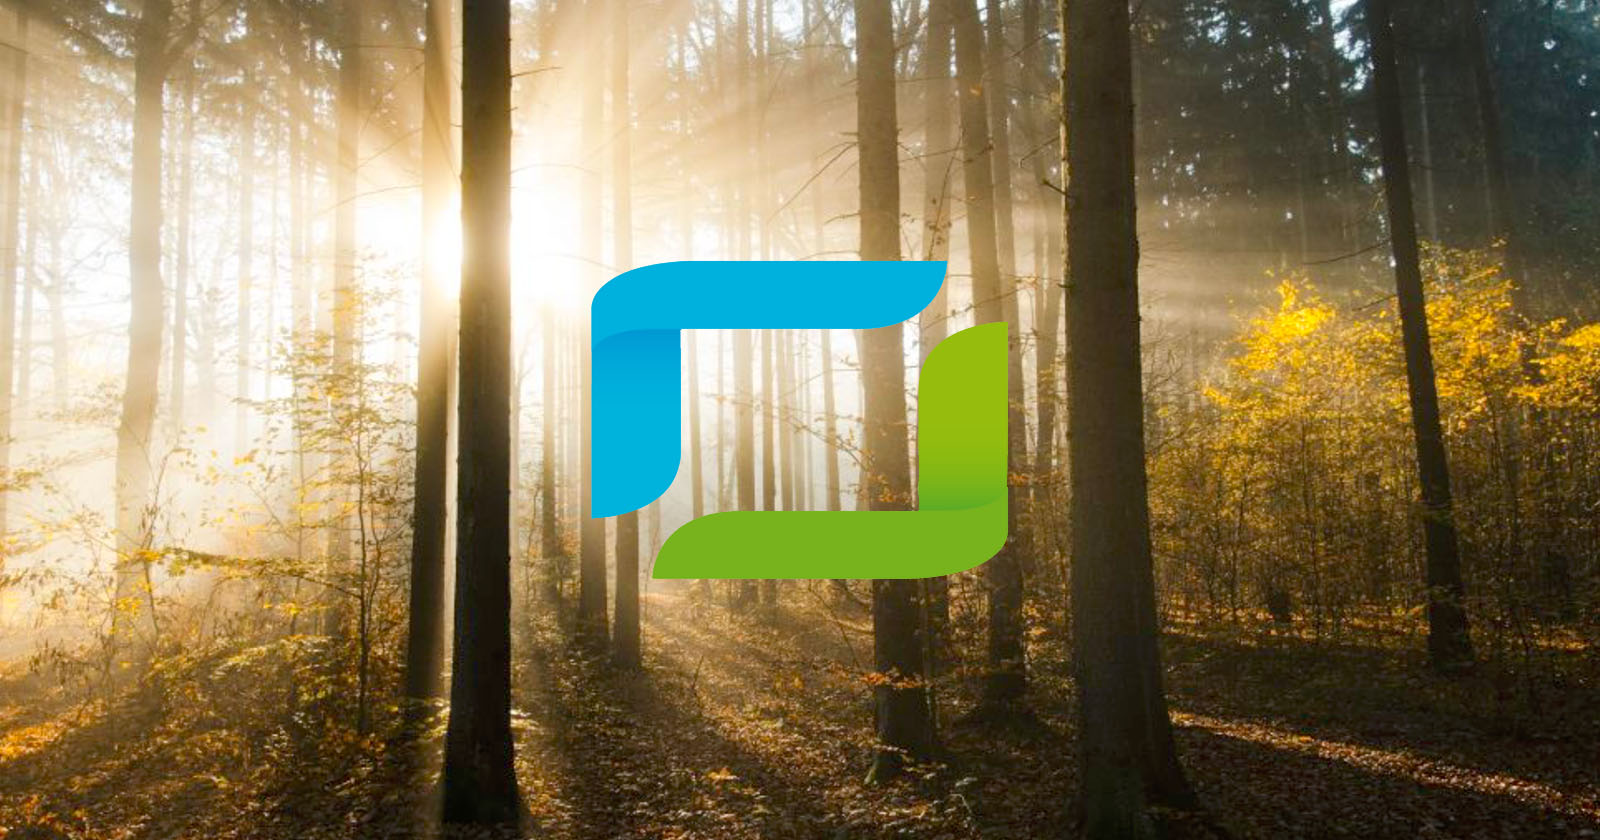 Sunlight filters through a misty forest, illuminating trees and casting long shadows. an abstract blue and green logo overlays the scene on the left side.